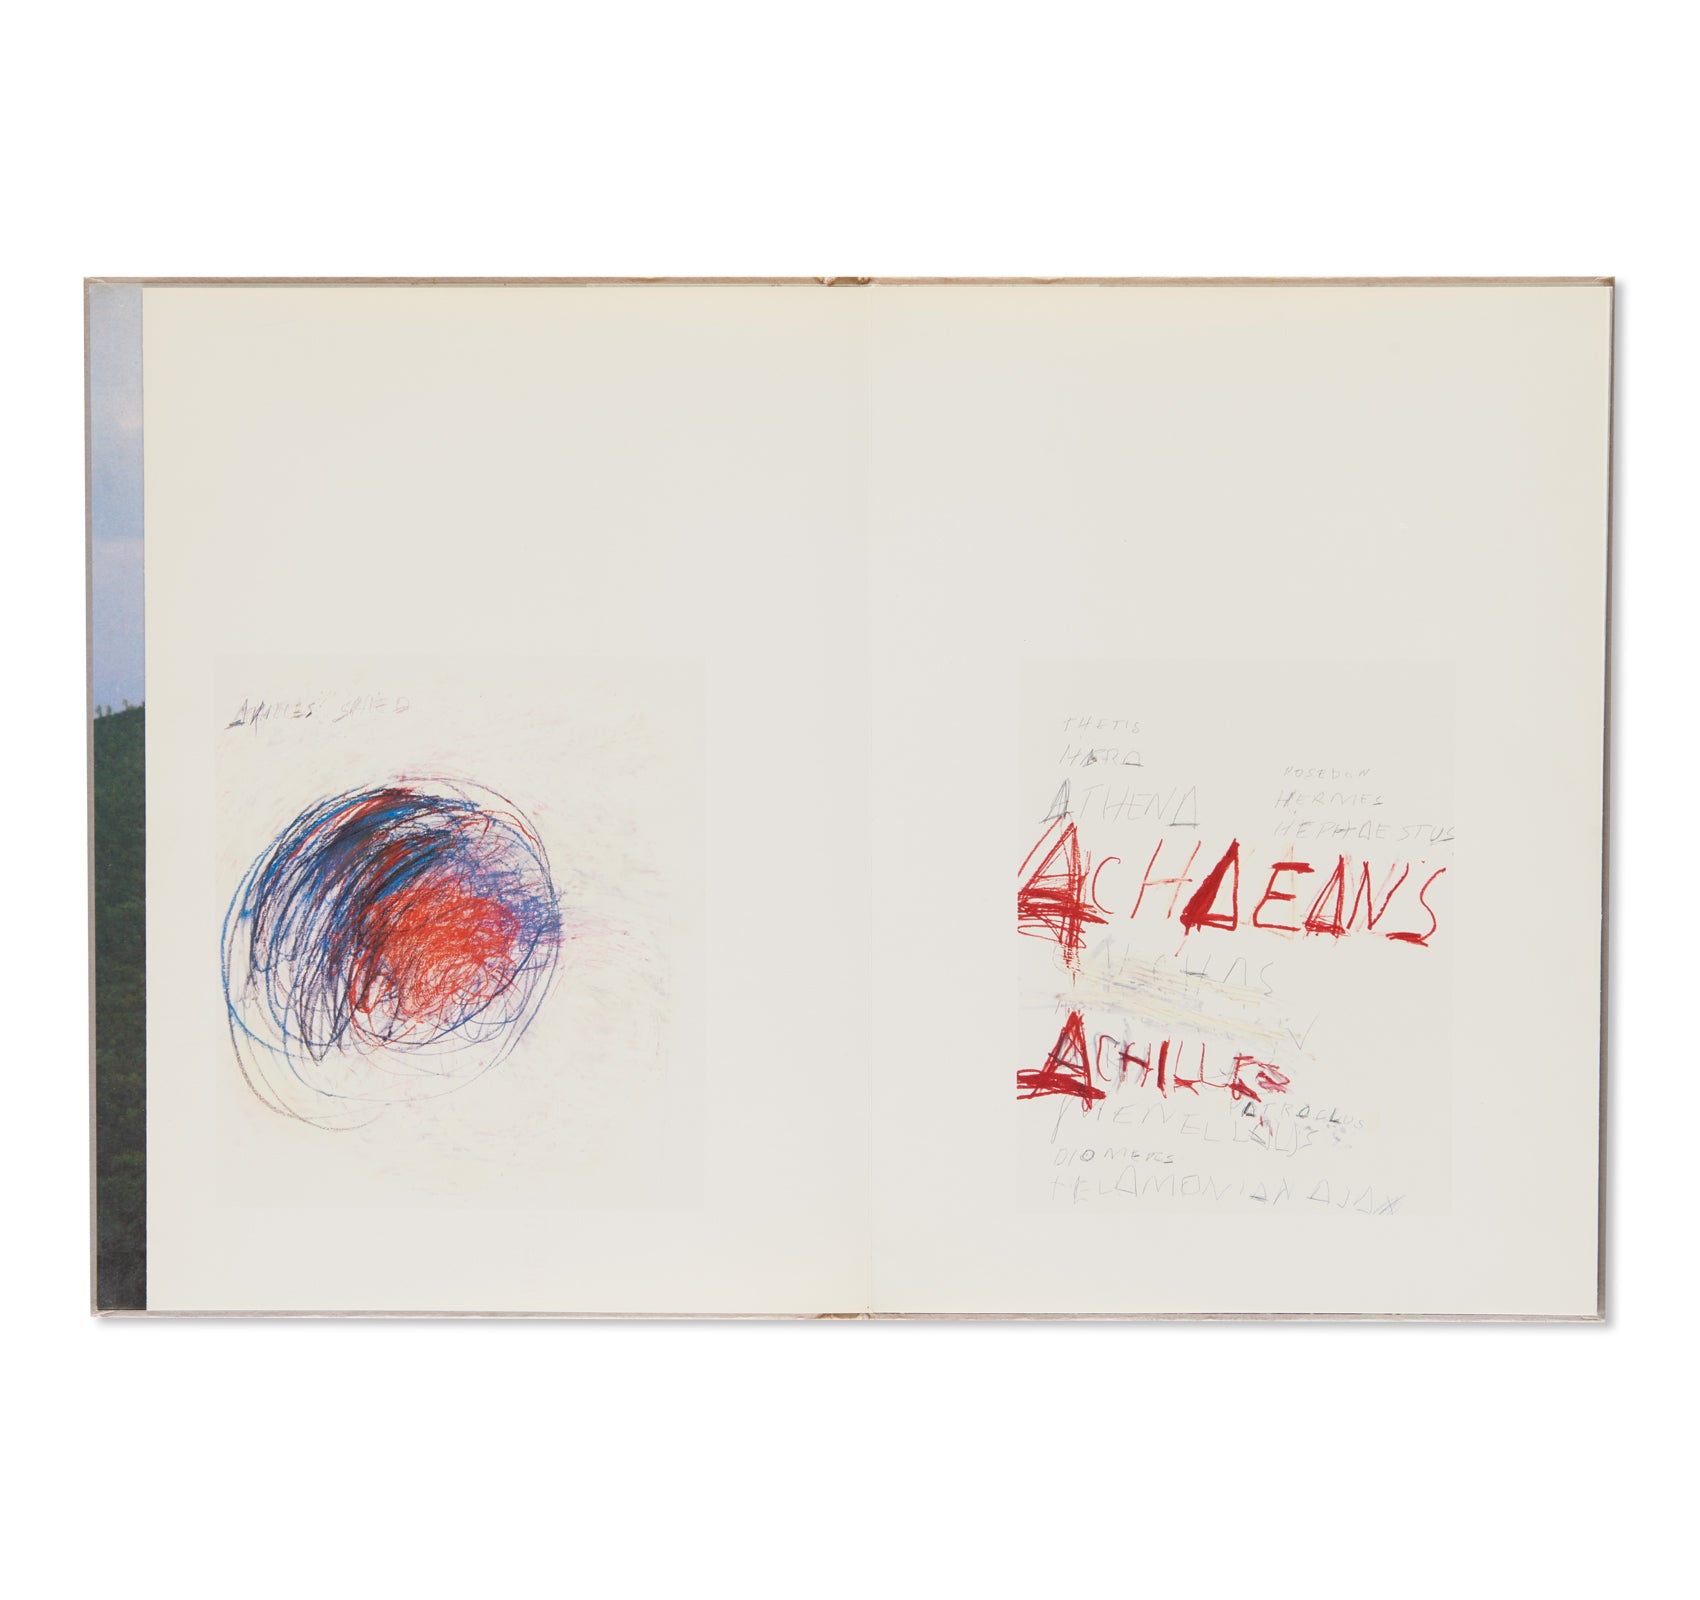 FIFTY DAYS AT ILIAM by Cy Twombly [FIRST EDITION] – twelvebooks